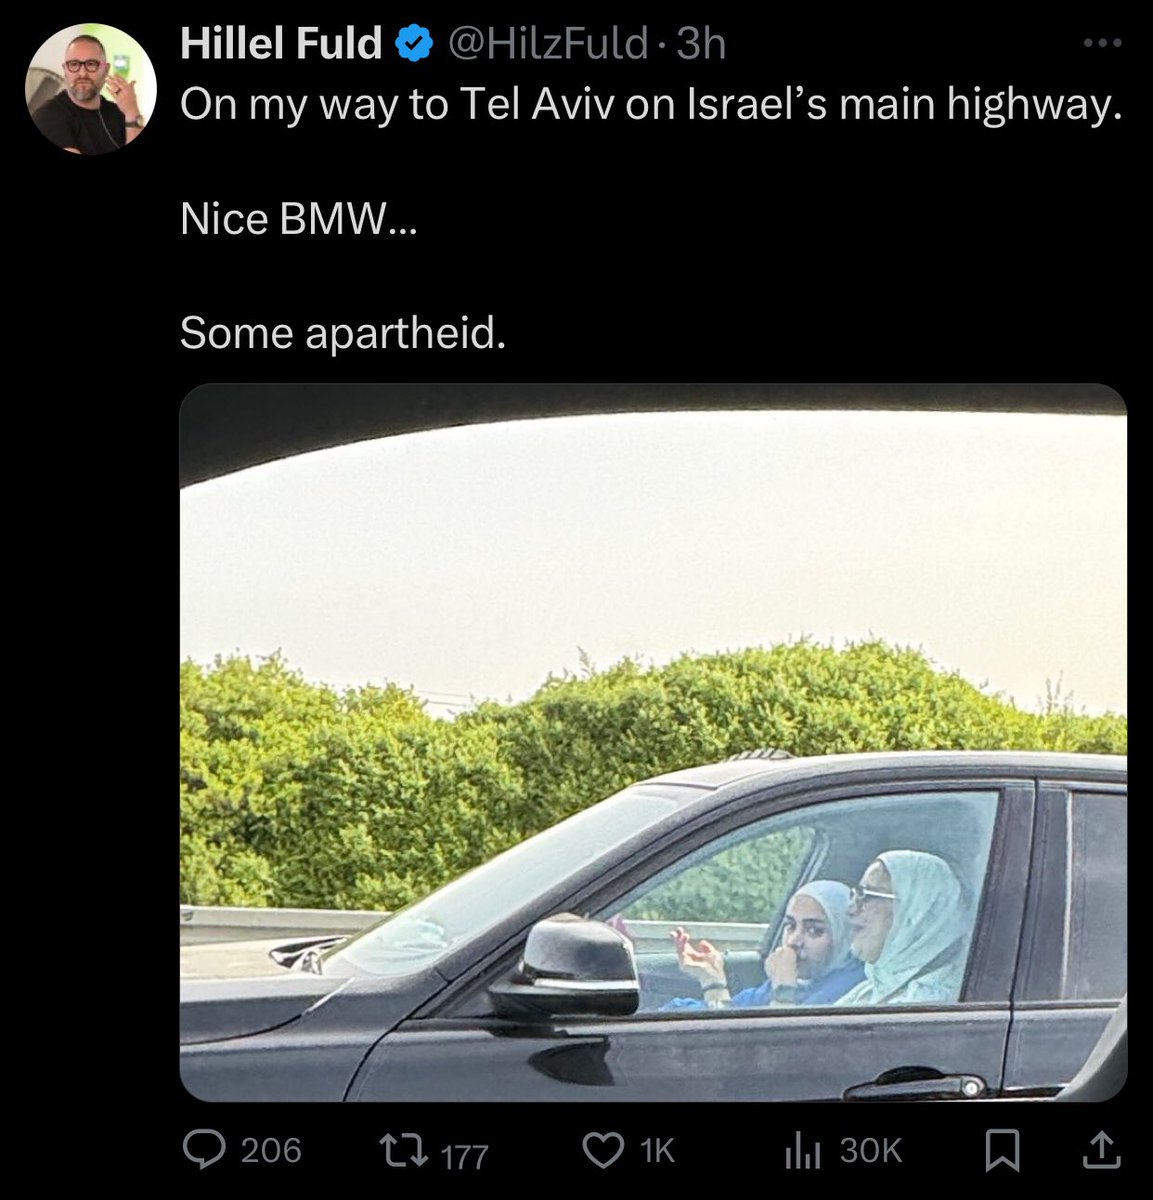 *sees two Palestinian women minding their own business in a car so takes an intrusive photo of them & posts it to 130k followers on the internet*

“See? No apartheid, their life couldn’t have been any more peaceful”